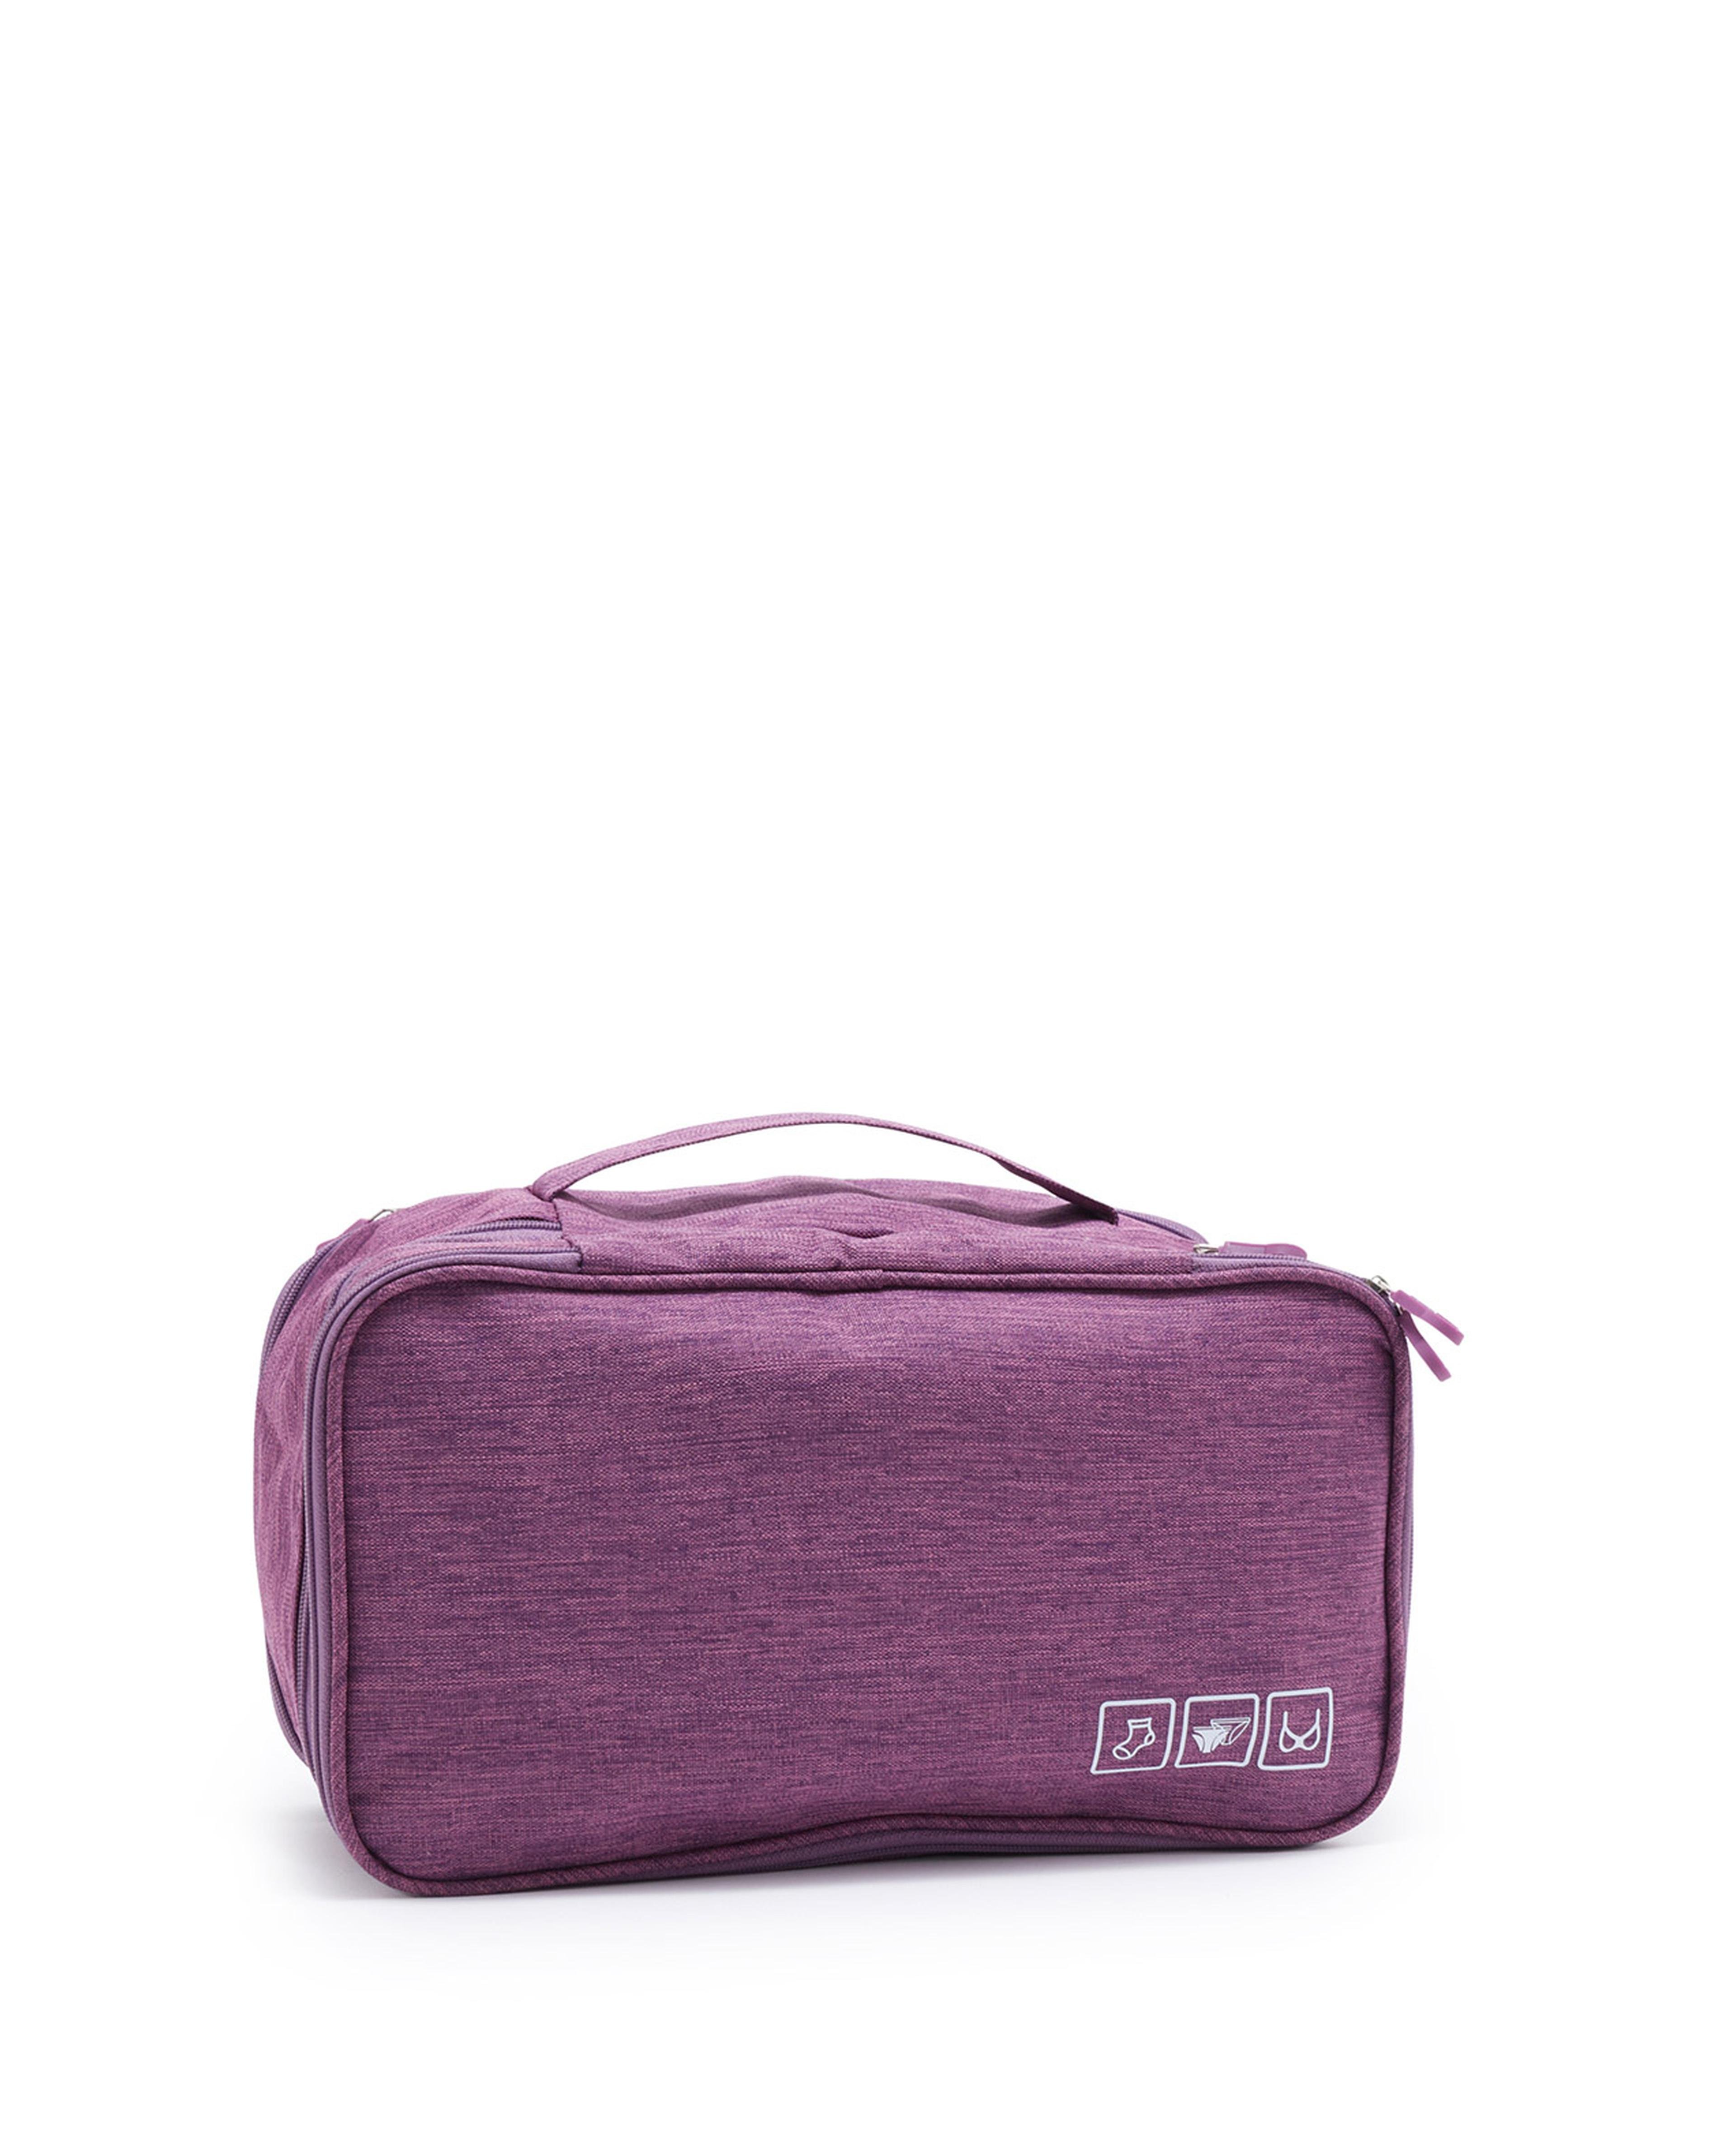 Travel Toiletry Pouch